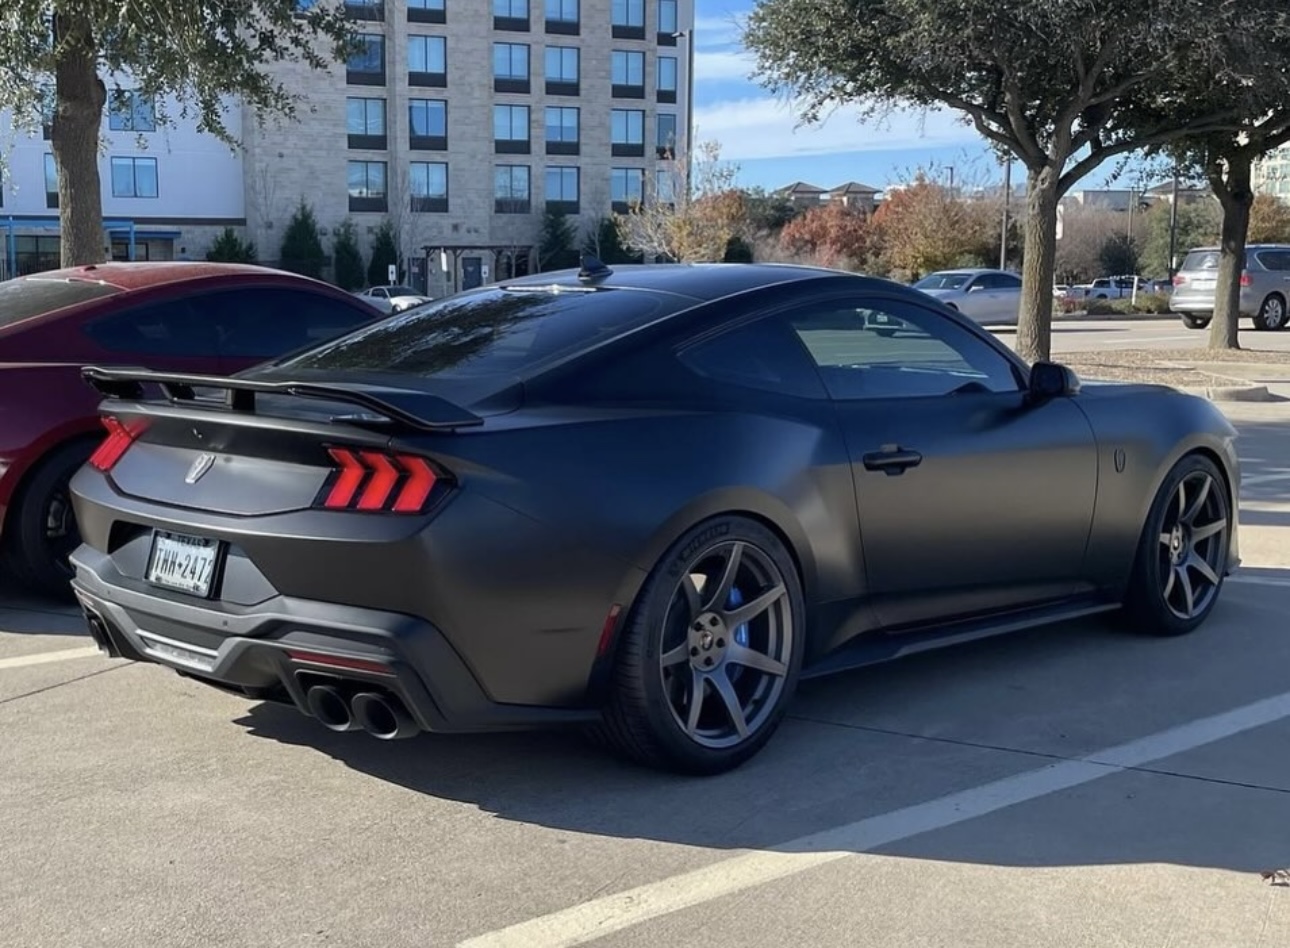 S650 Mustang Official Mustang S650 Aftermarket Wheel & Tire Thread IMG_3103